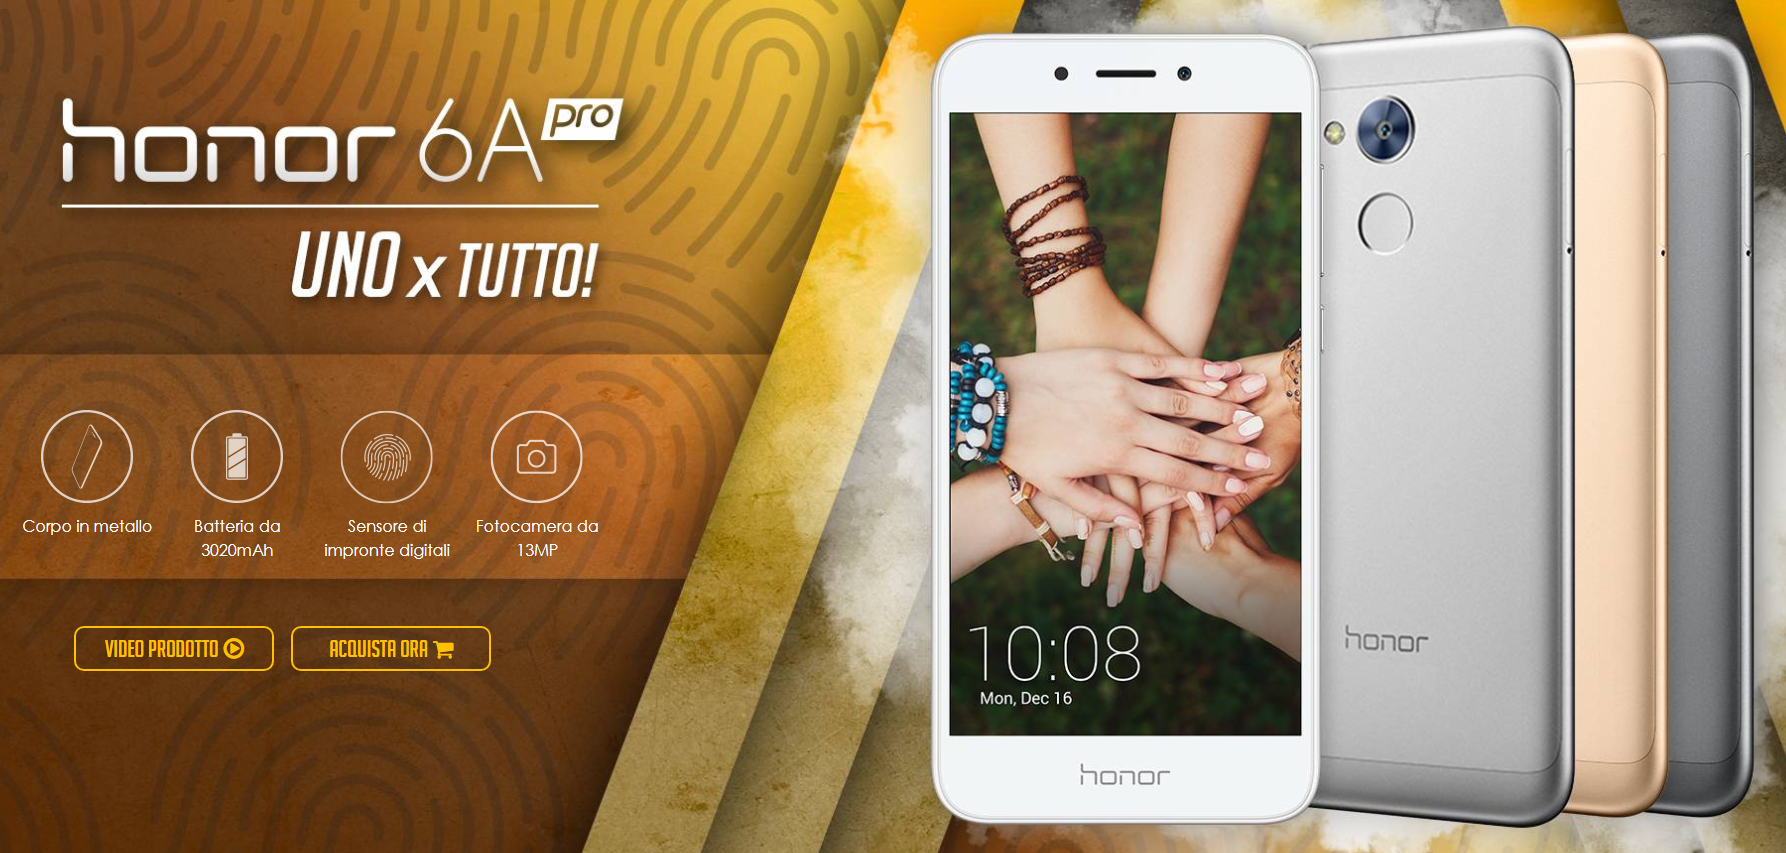 Honor Holly 4 gets released in Europe as Honor 6A Pro